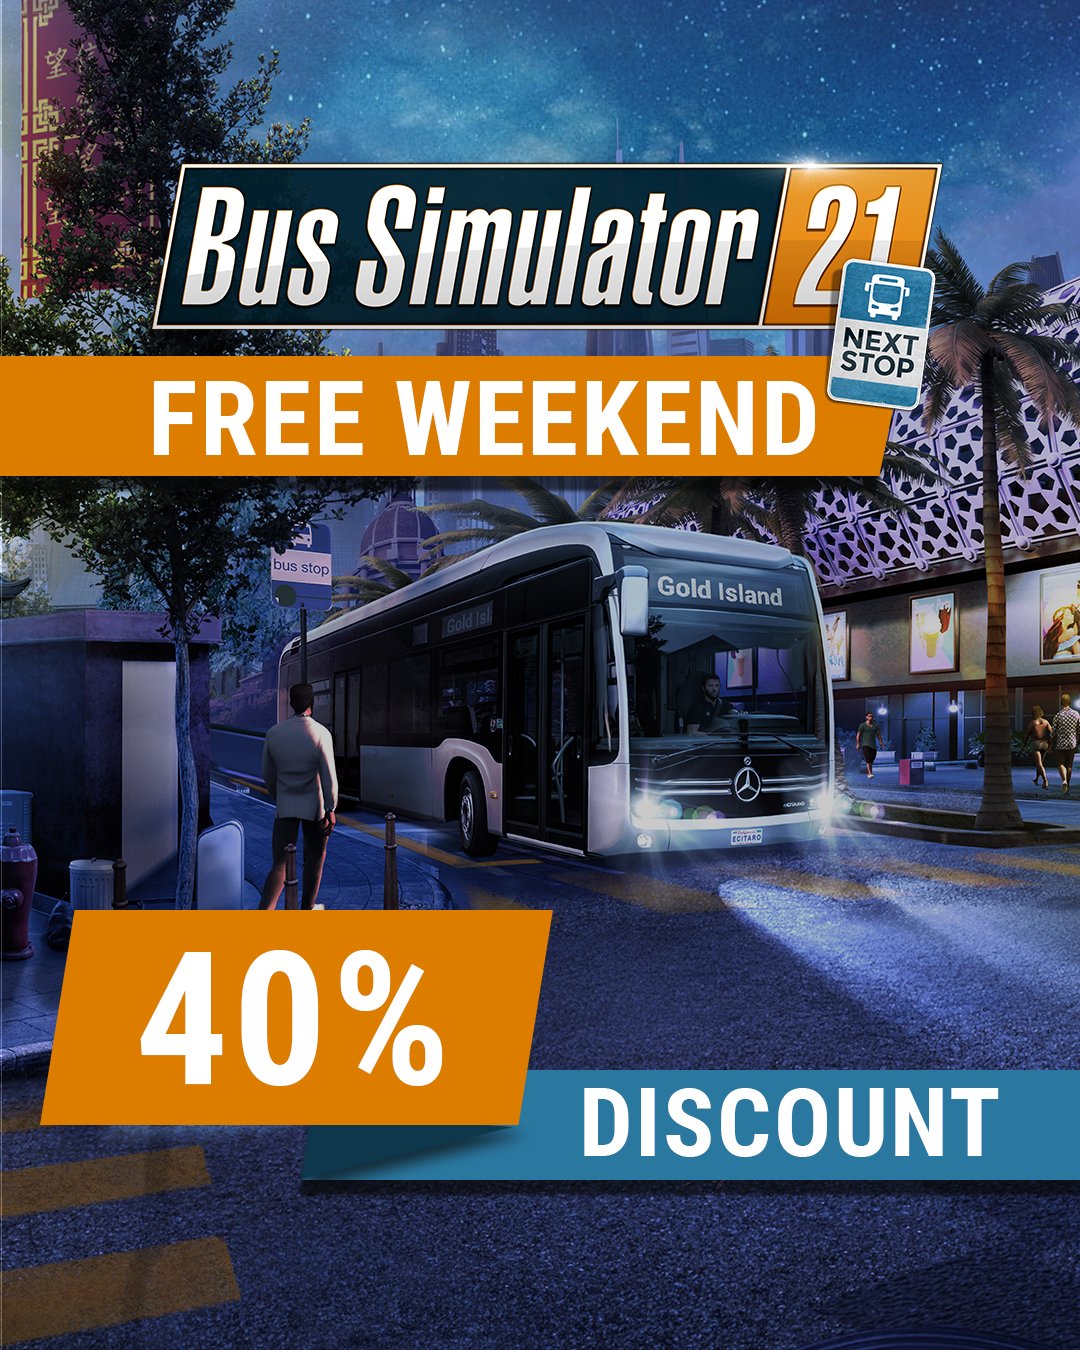 Bus Simulator on X: Starting today, 𝐁𝐮𝐬 𝐒𝐢𝐦𝐮𝐥𝐚𝐭𝐨𝐫 𝟐𝟏  𝐍𝐞𝐱𝐭 𝐒𝐭𝐨𝐩 is playable 𝐜𝐨𝐦𝐩𝐥𝐞𝐭𝐞𝐥𝐲 𝐟𝐨𝐫 𝐟𝐫𝐞